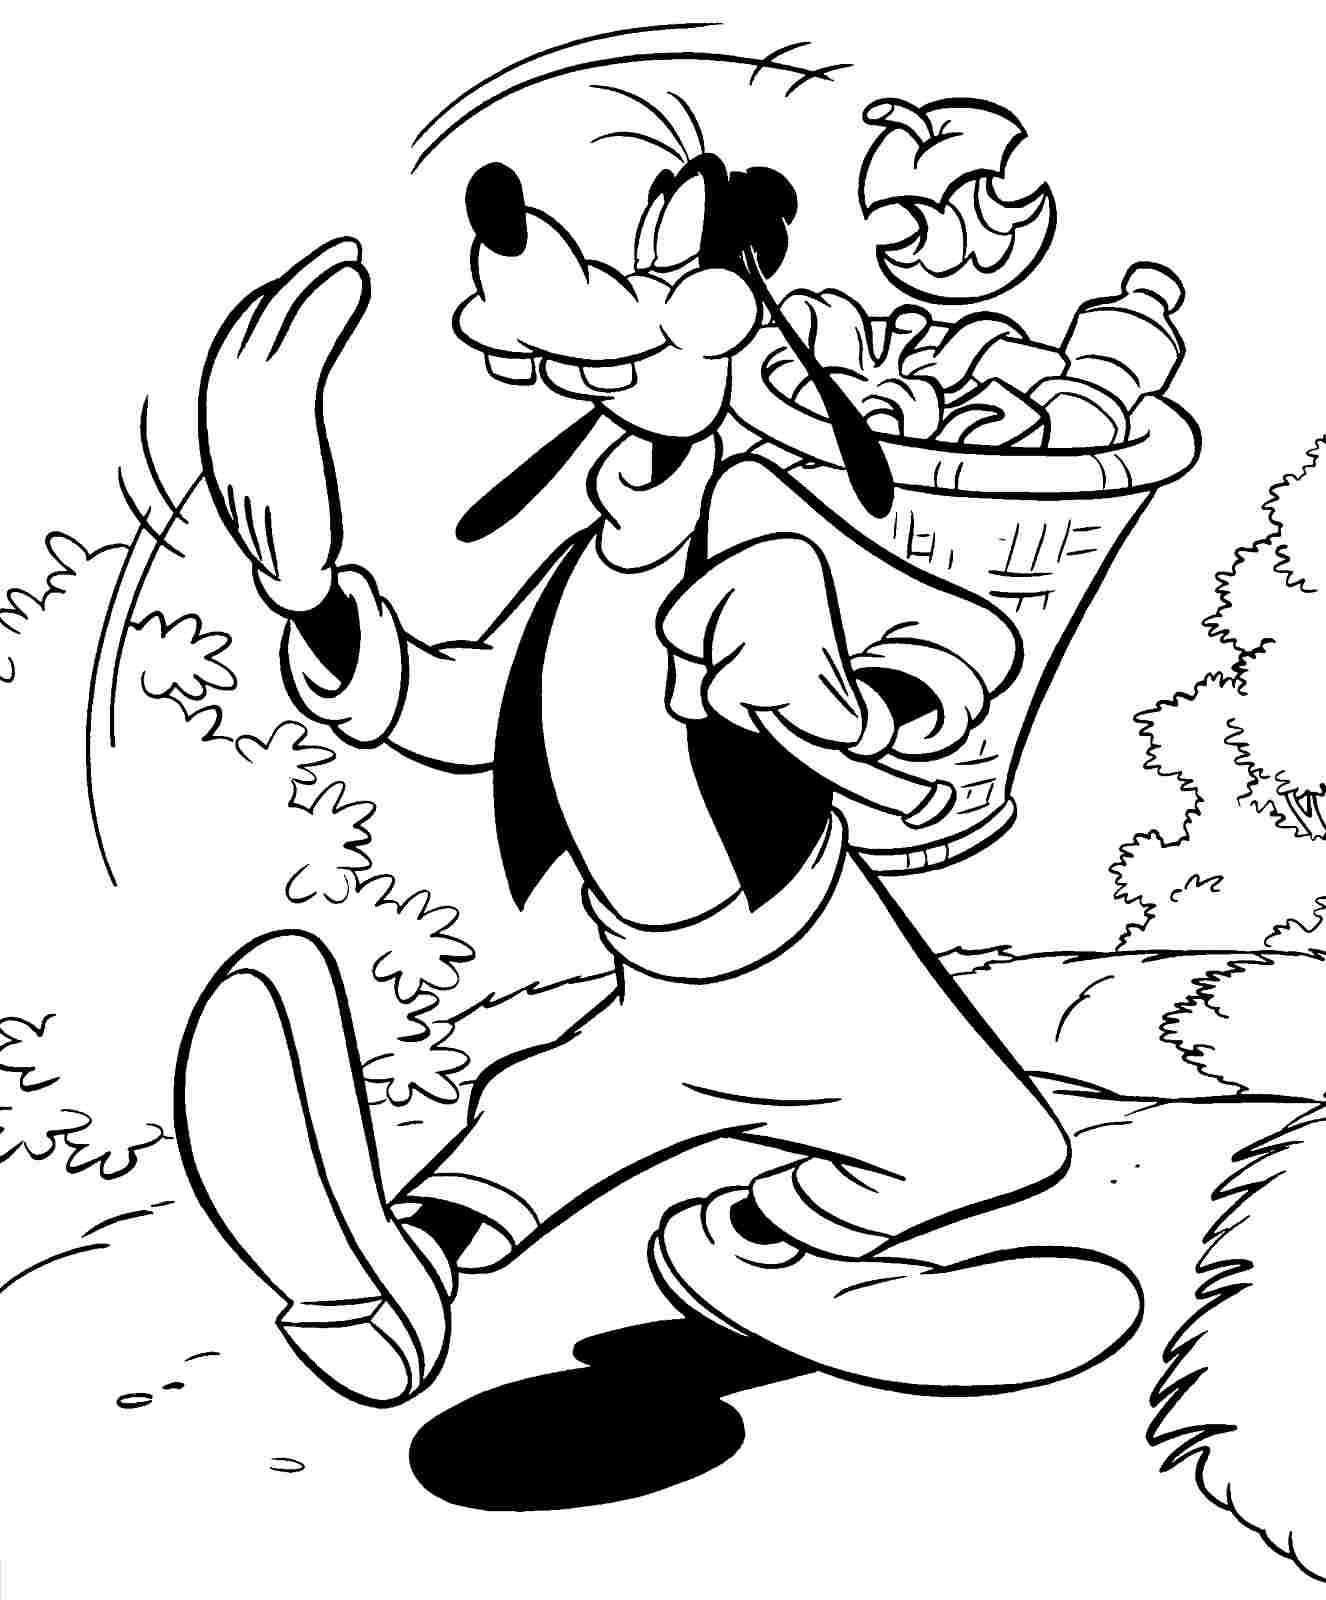 Goofy In The Street Coloring Pages